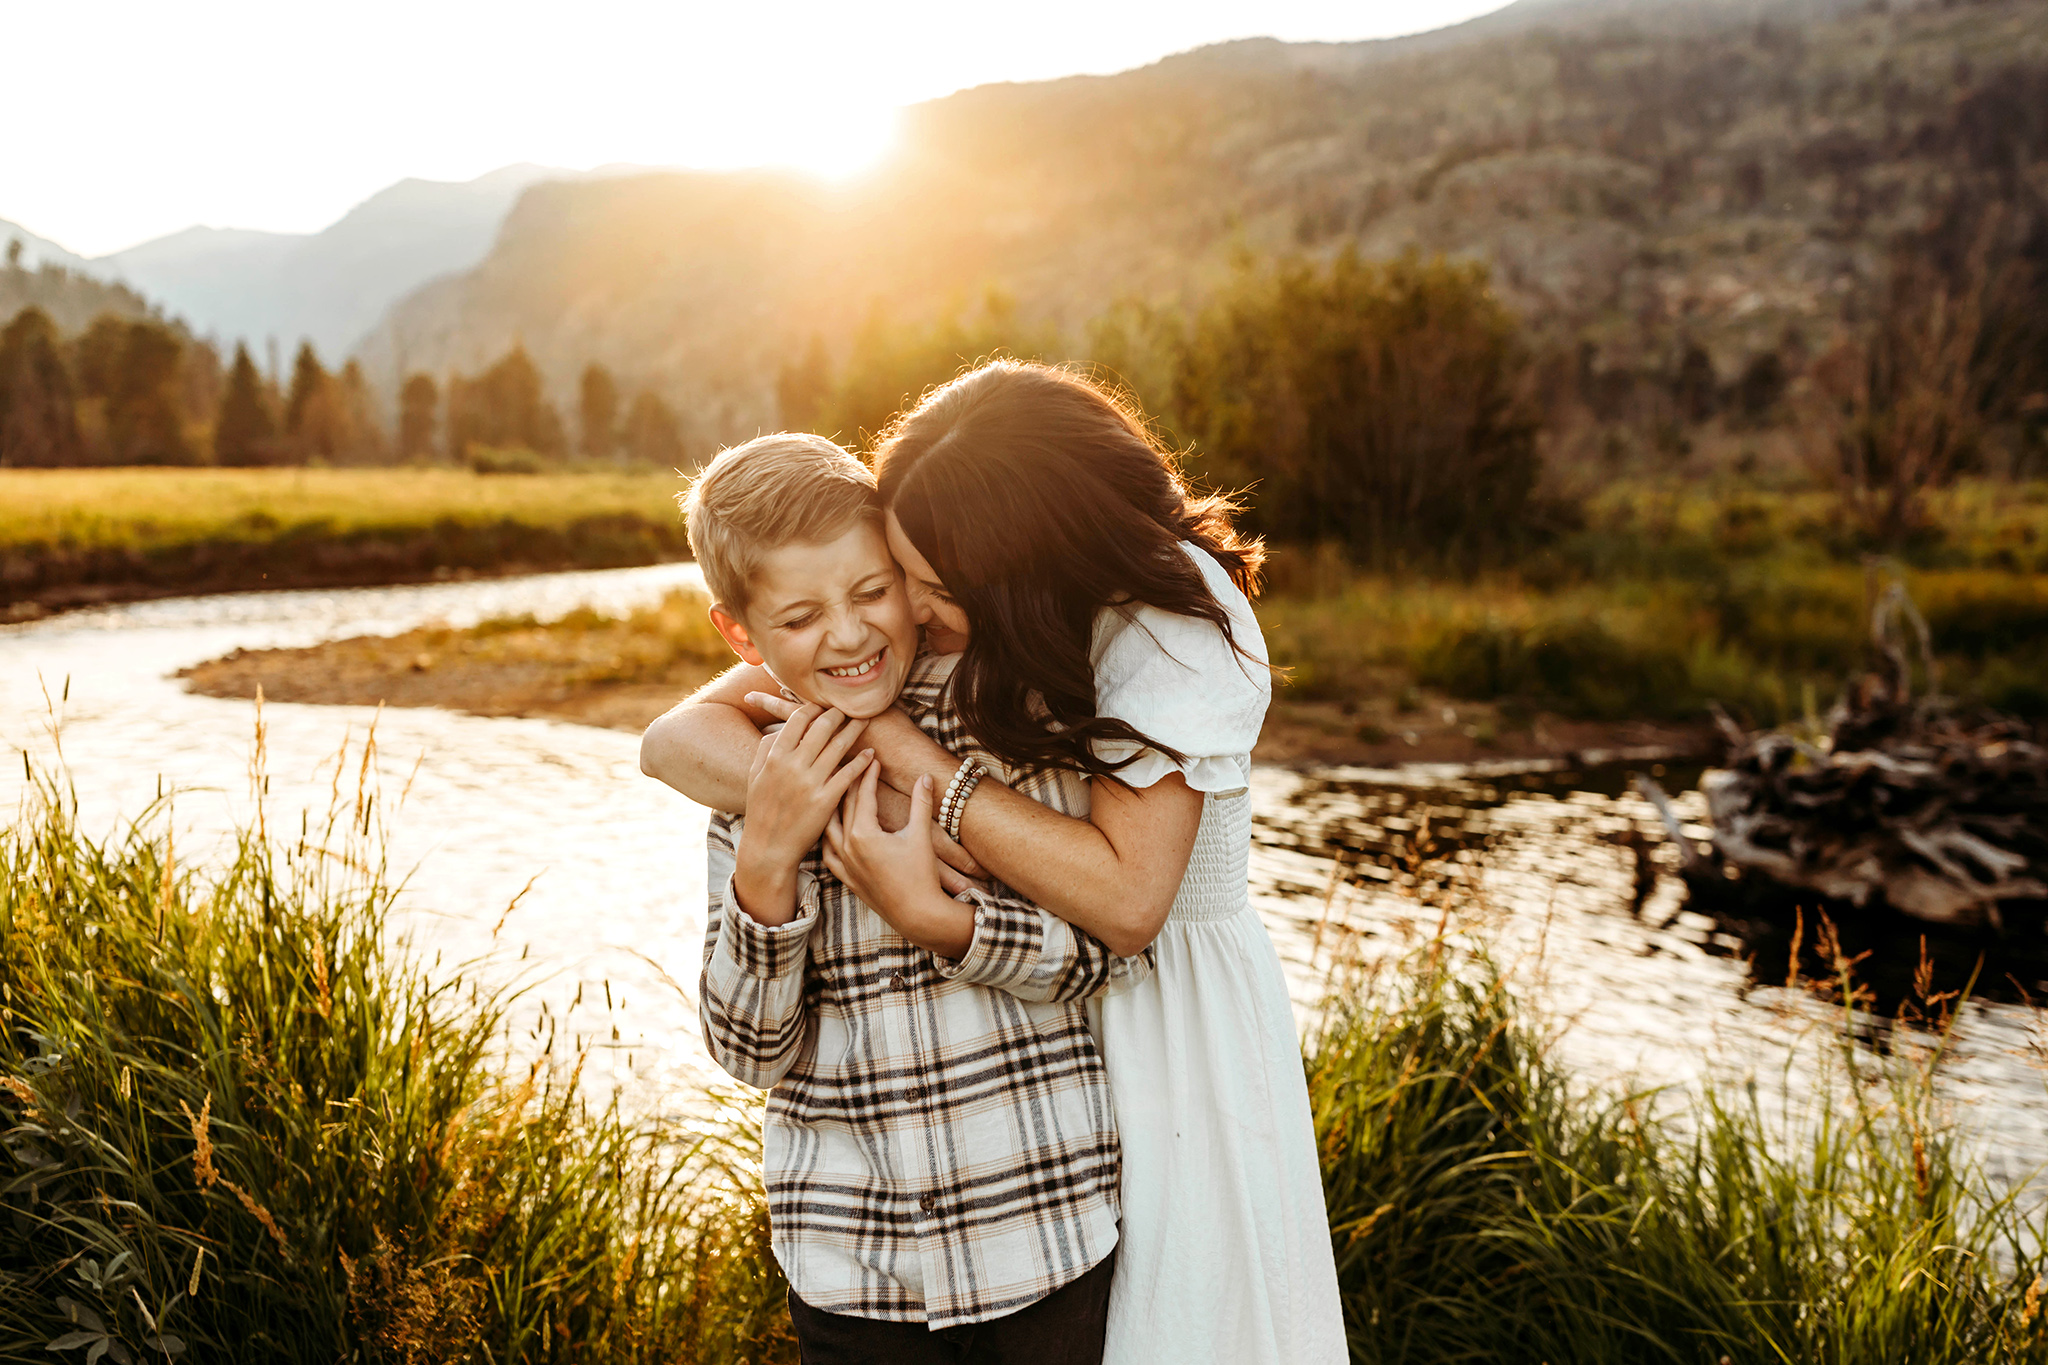 Mom hugging and kissing son at sunset in the Estes Park mountains.